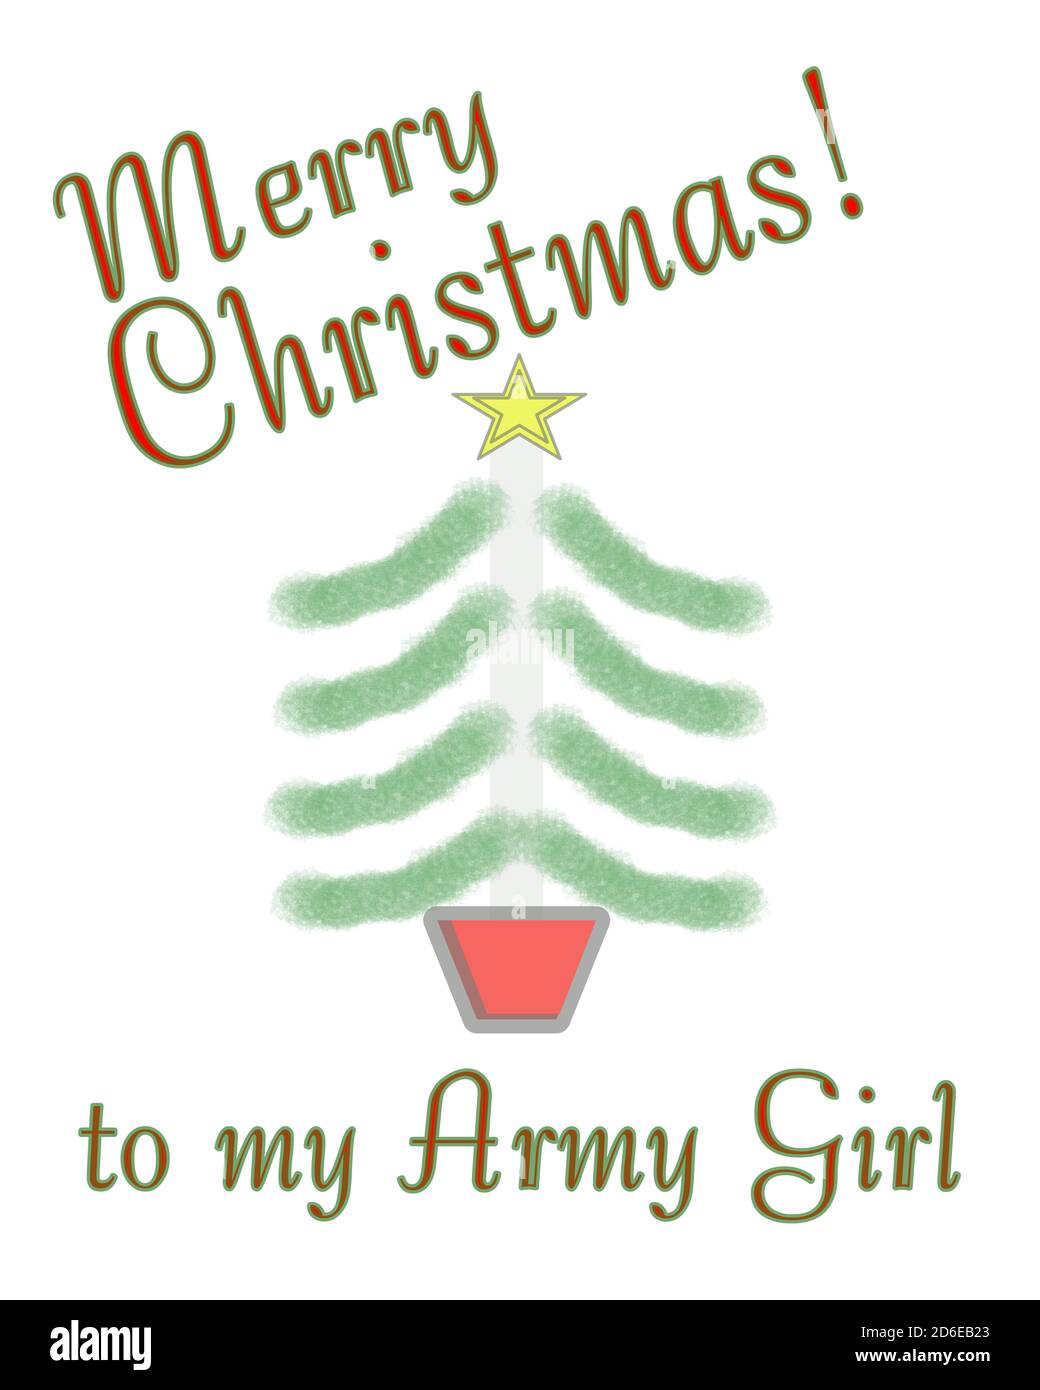 Merry Christmas army girl greeting card design on a white background with hand drawn Christmas tree. Stock Photo